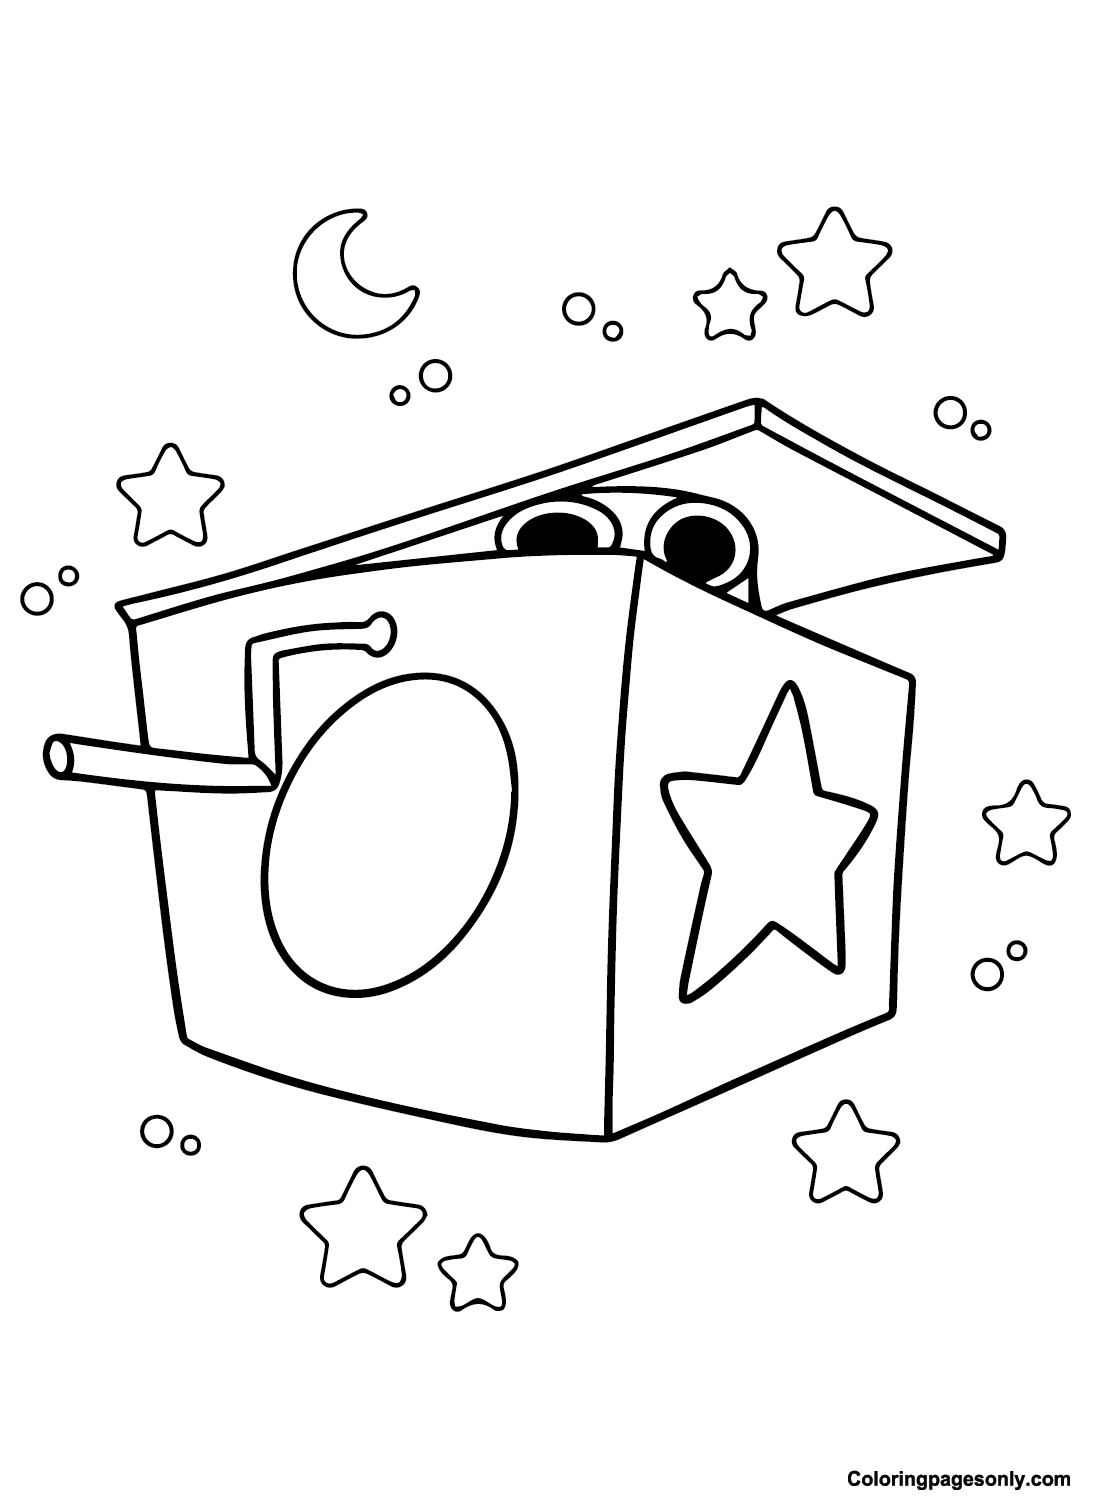 Boxy Boo Coloring Pages Printable for ...